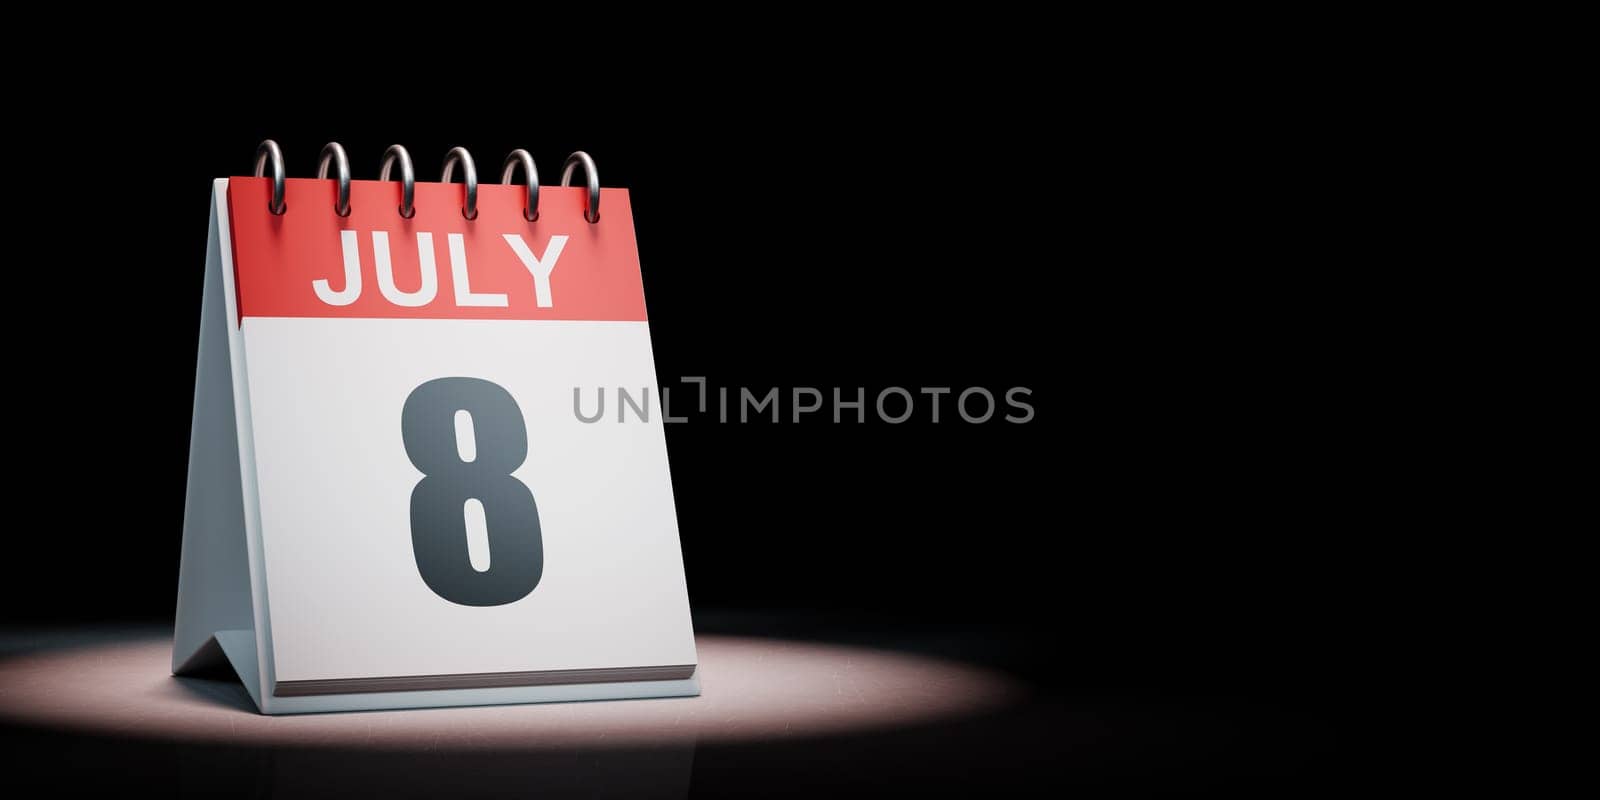 Red and White July 8 Desk Calendar Spotlighted on Black Background with Copy Space 3D Illustration